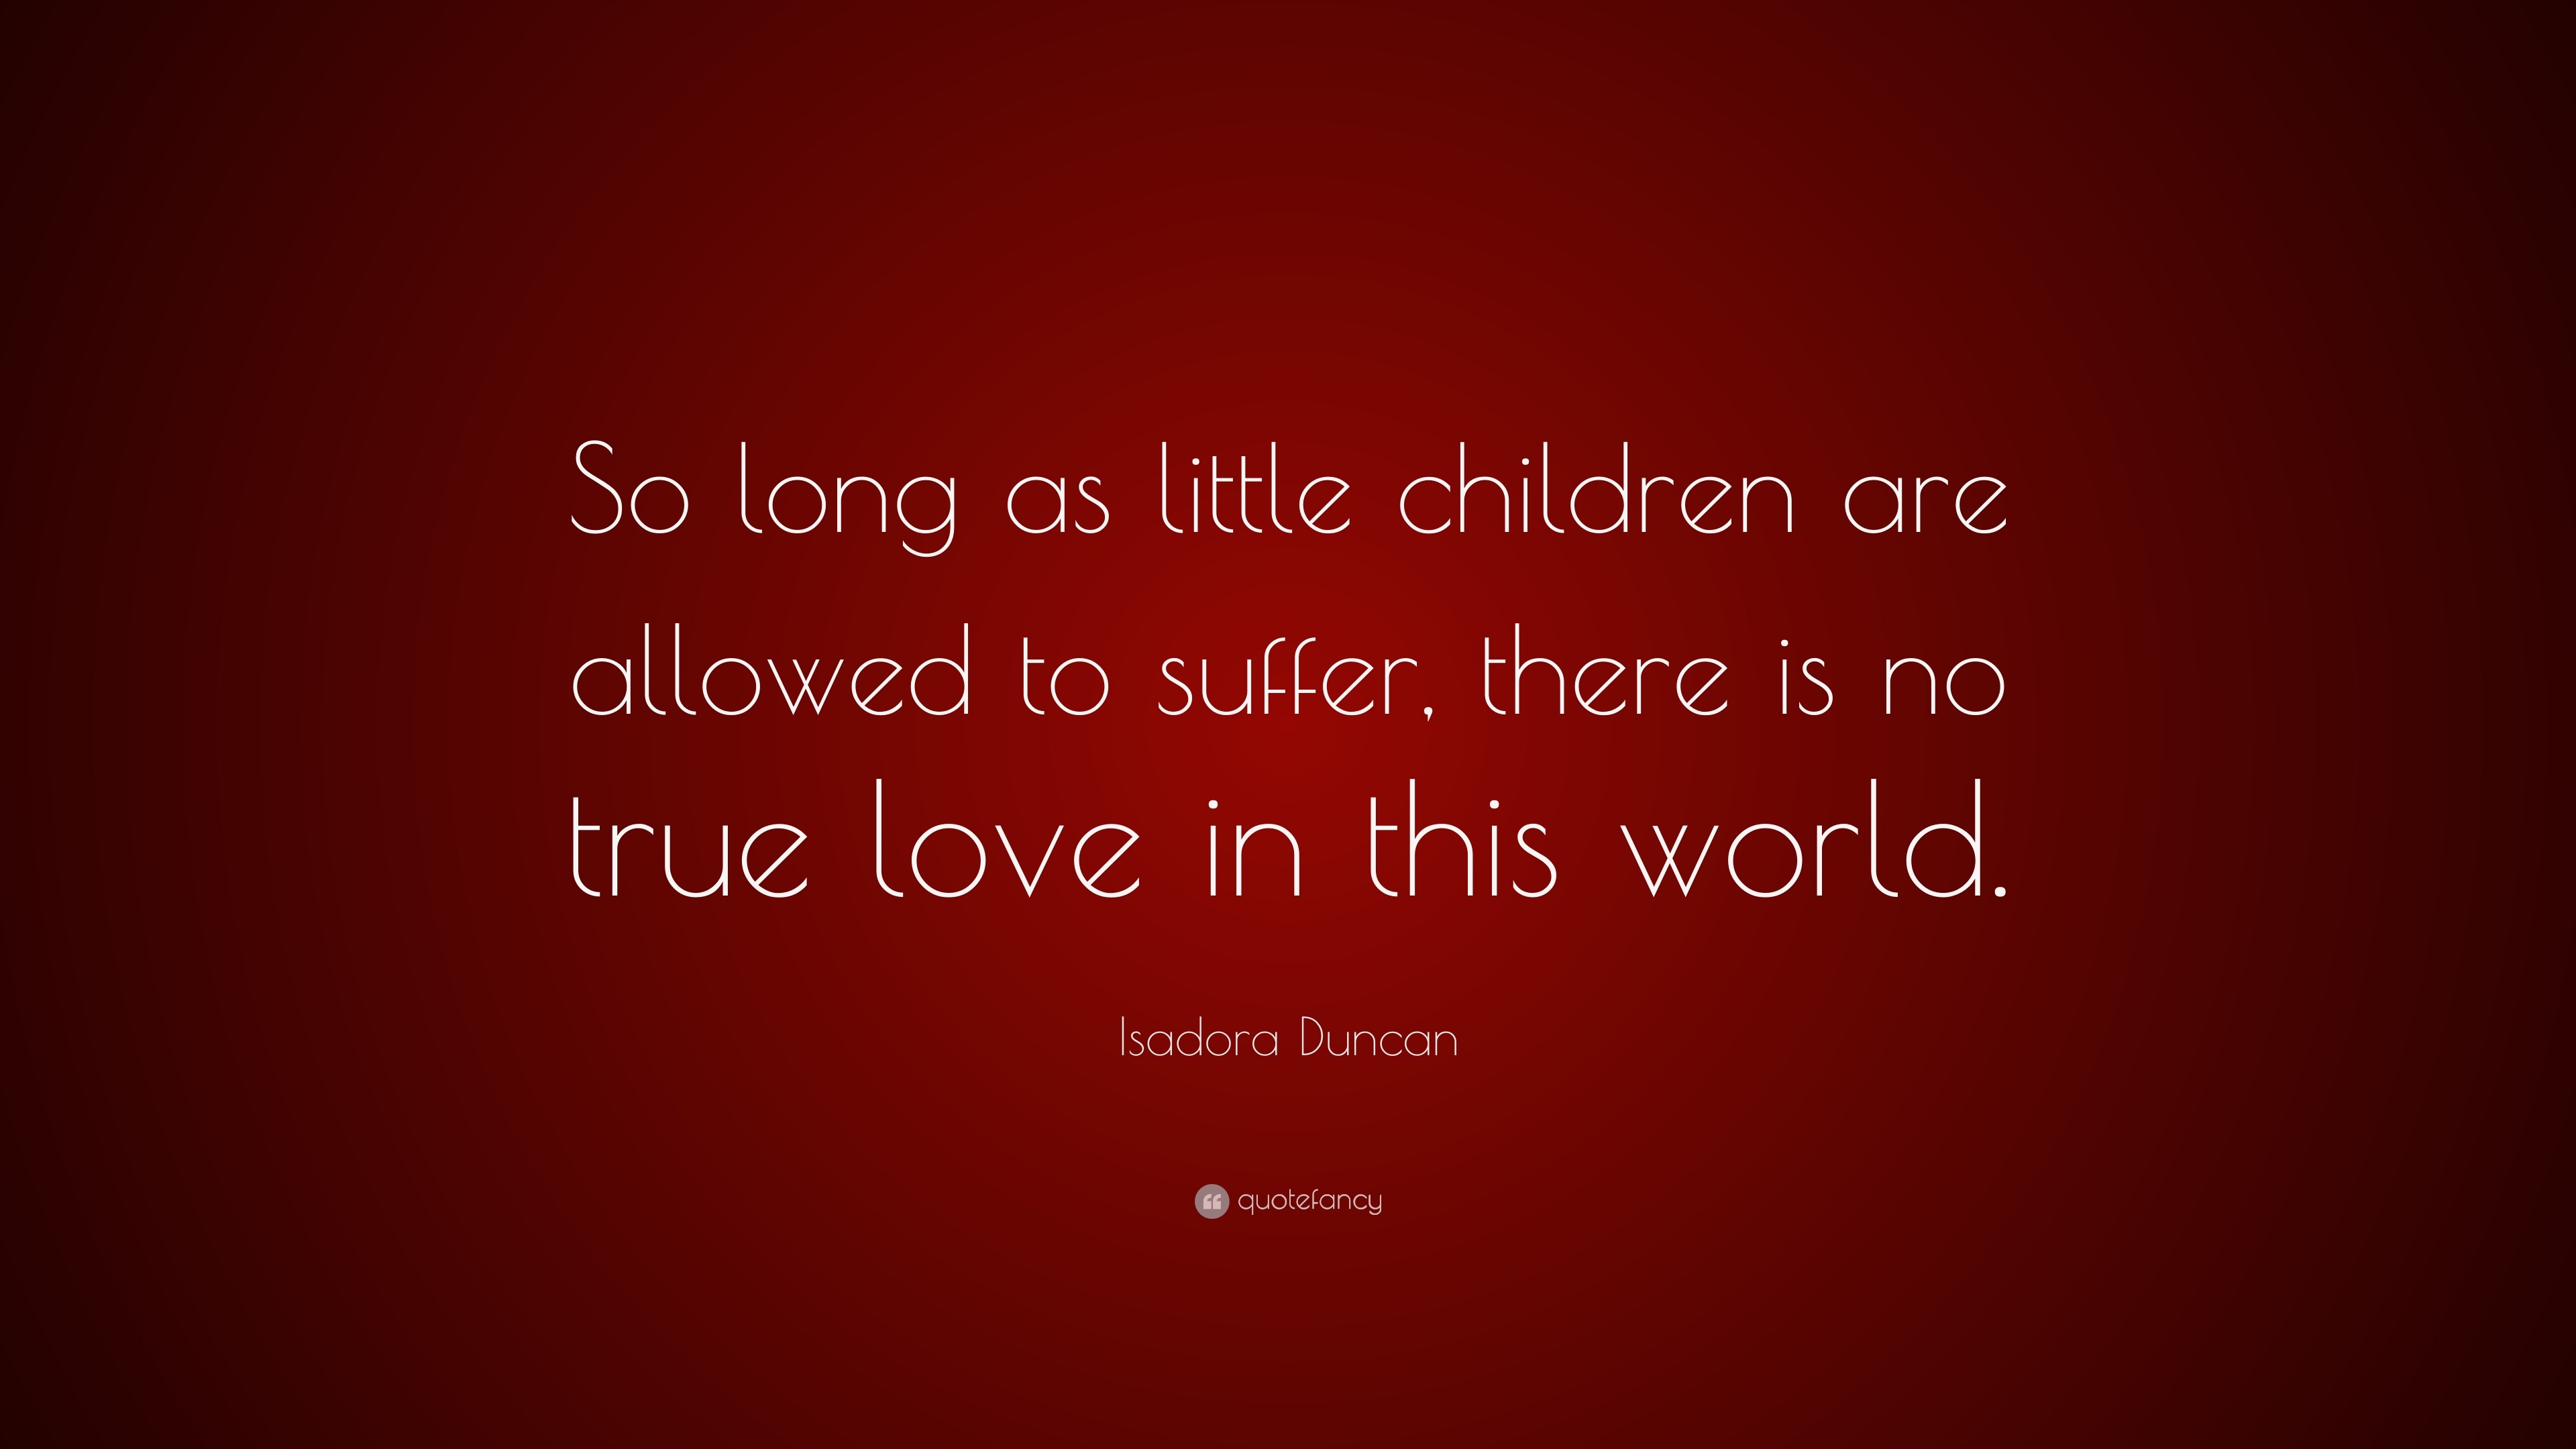 Isadora Duncan Quote: “So long as little children are allowed to suffer ...